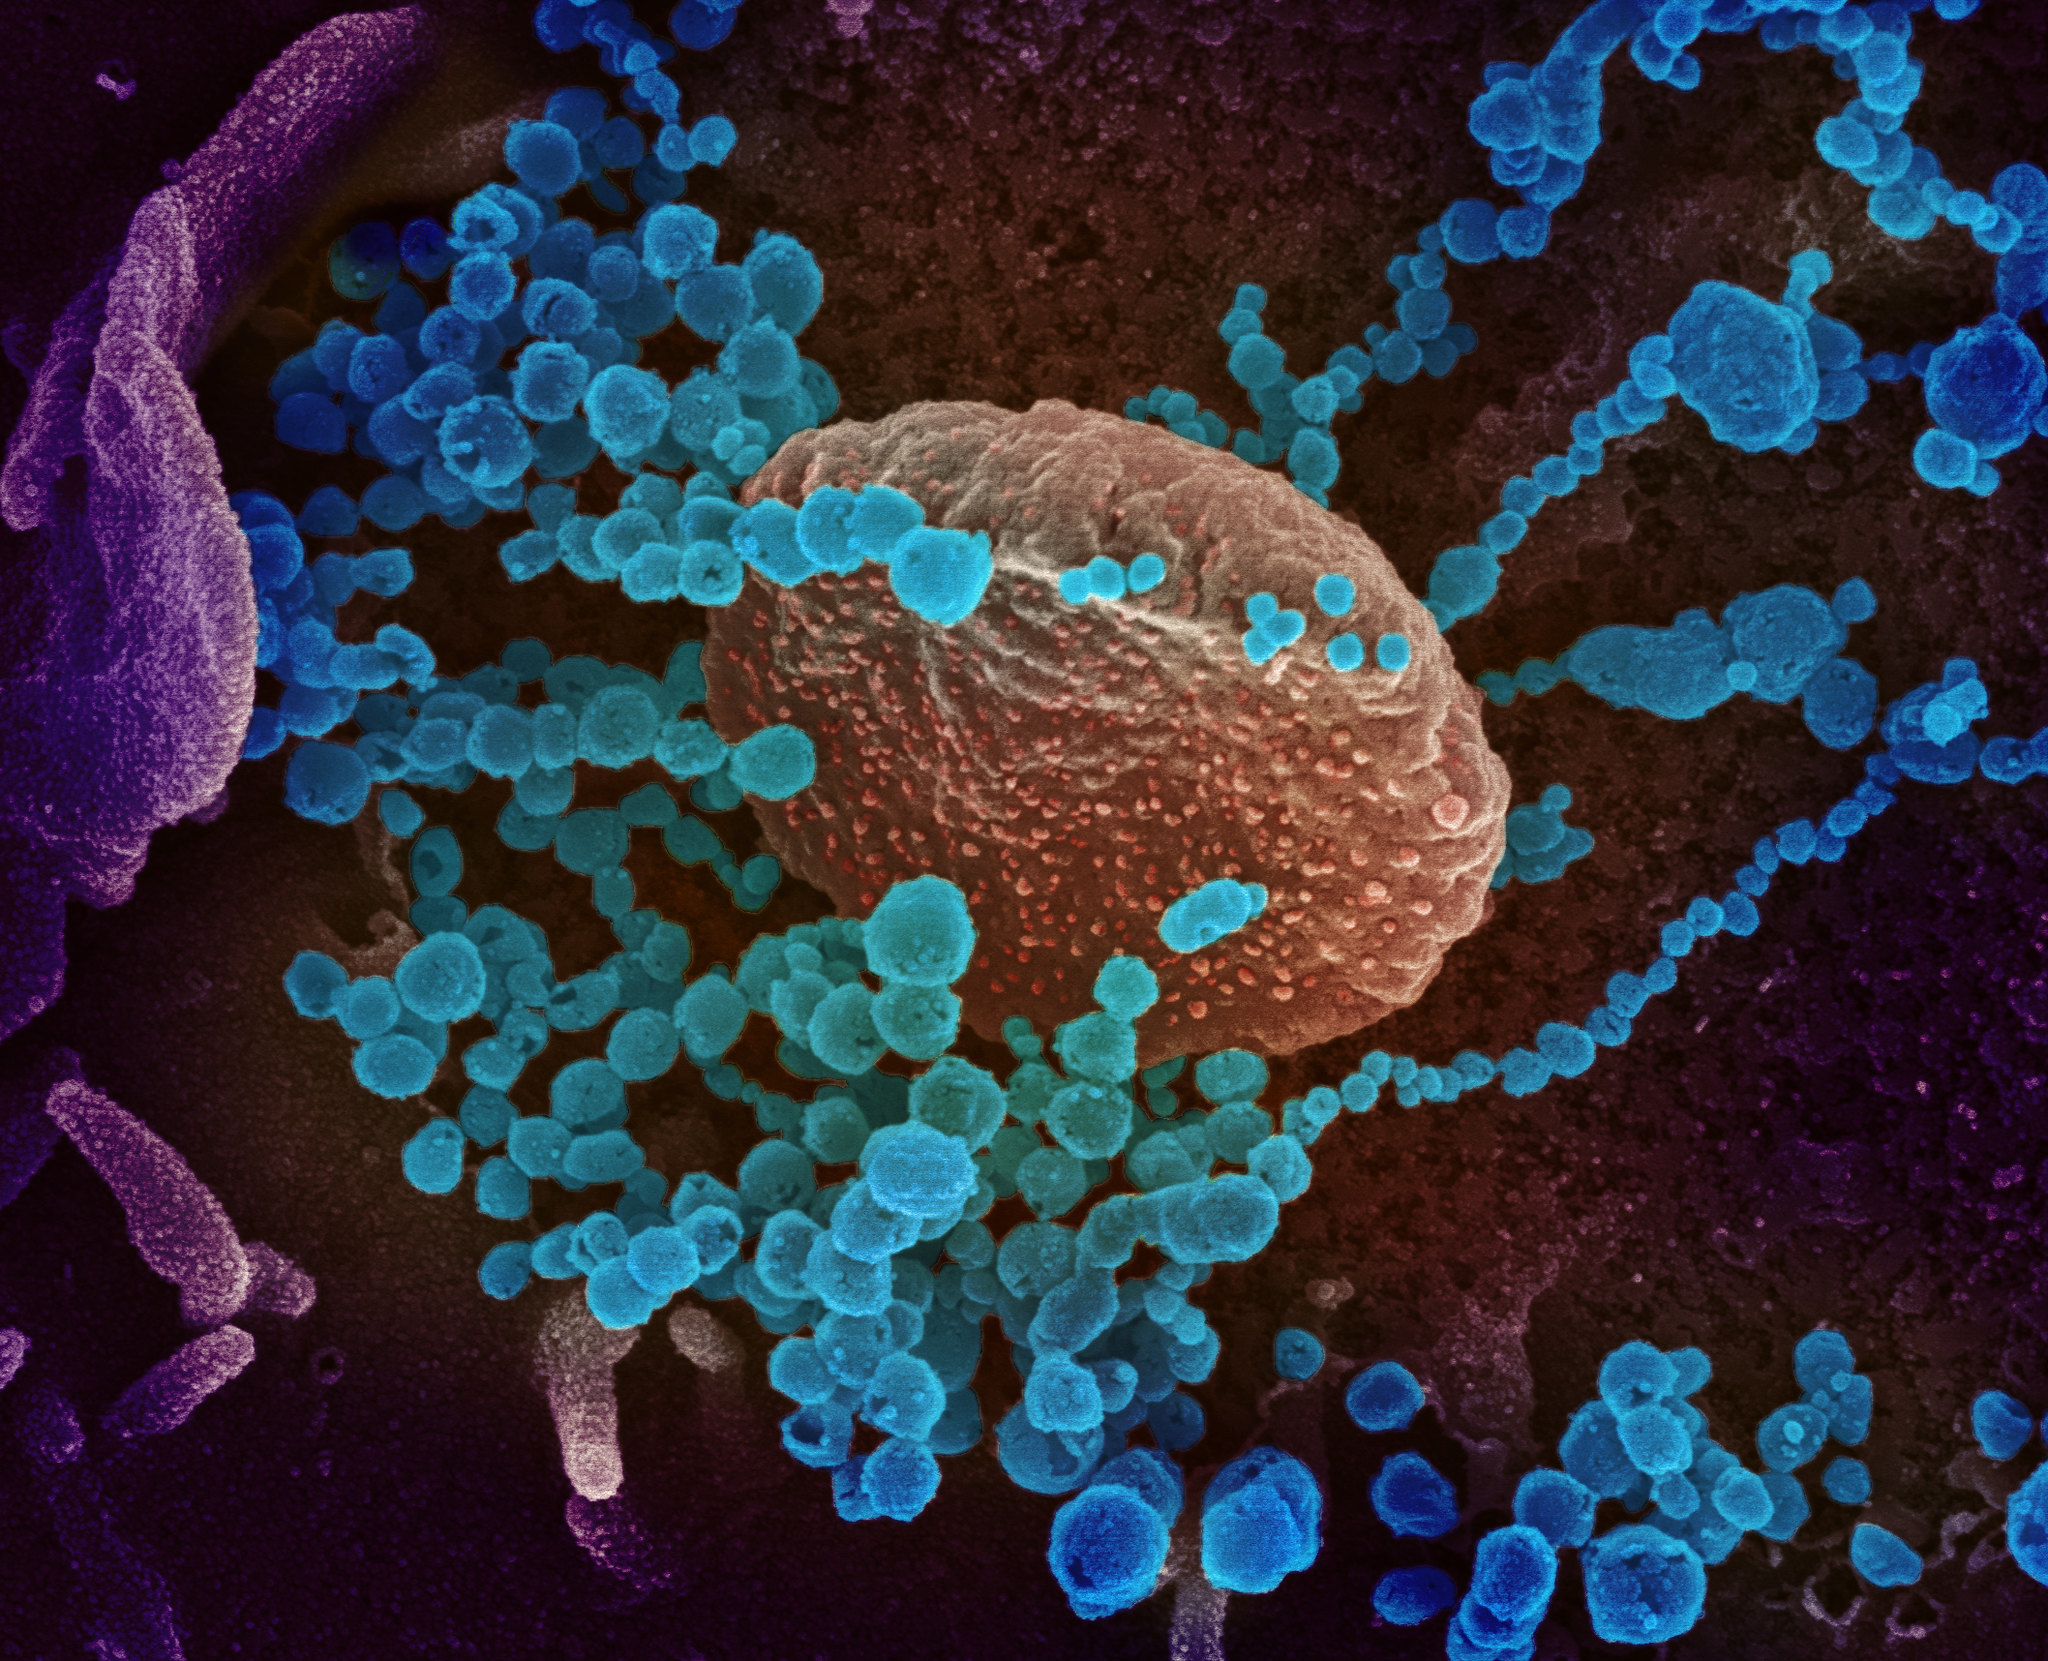 This scanning electron microscope image shows SARS-CoV-2 (round blue objects) emerging from the surface of cells cultured in the lab. SARS-CoV-2, also known as 2019-nCoV, is the virus that causes COVID-19. The virus shown was isolated from a patient in the U.S. Image captured and colorized at NIAID's Rocky Mountain Laboratories (RML) in Hamilton, Montana.